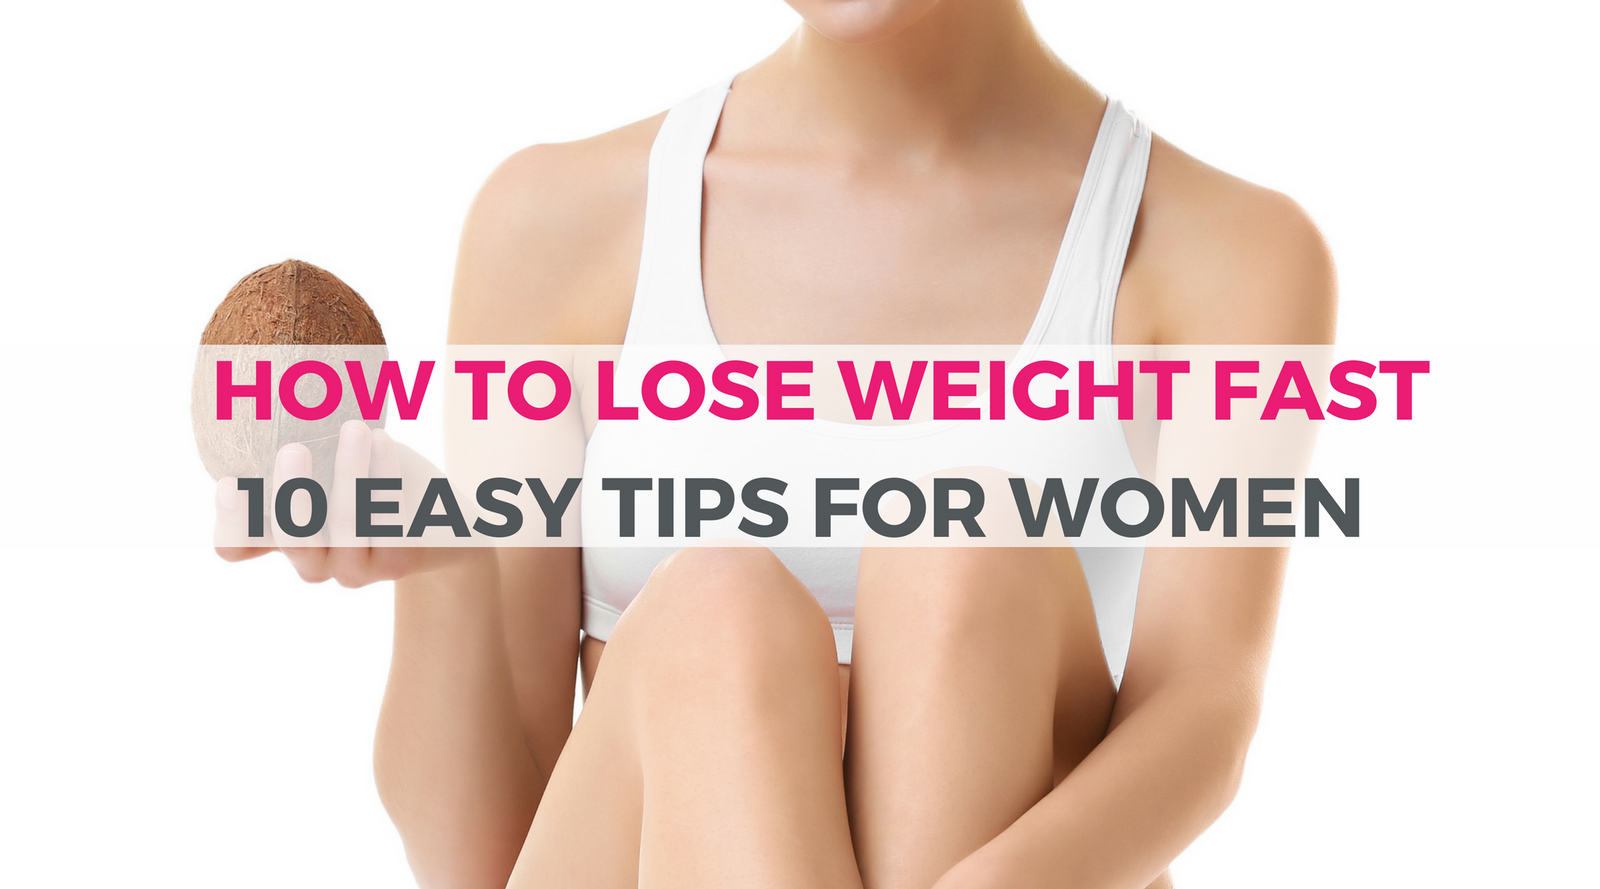 How to Lose Weight Well: Diet, Exercise, Hormones & Stress